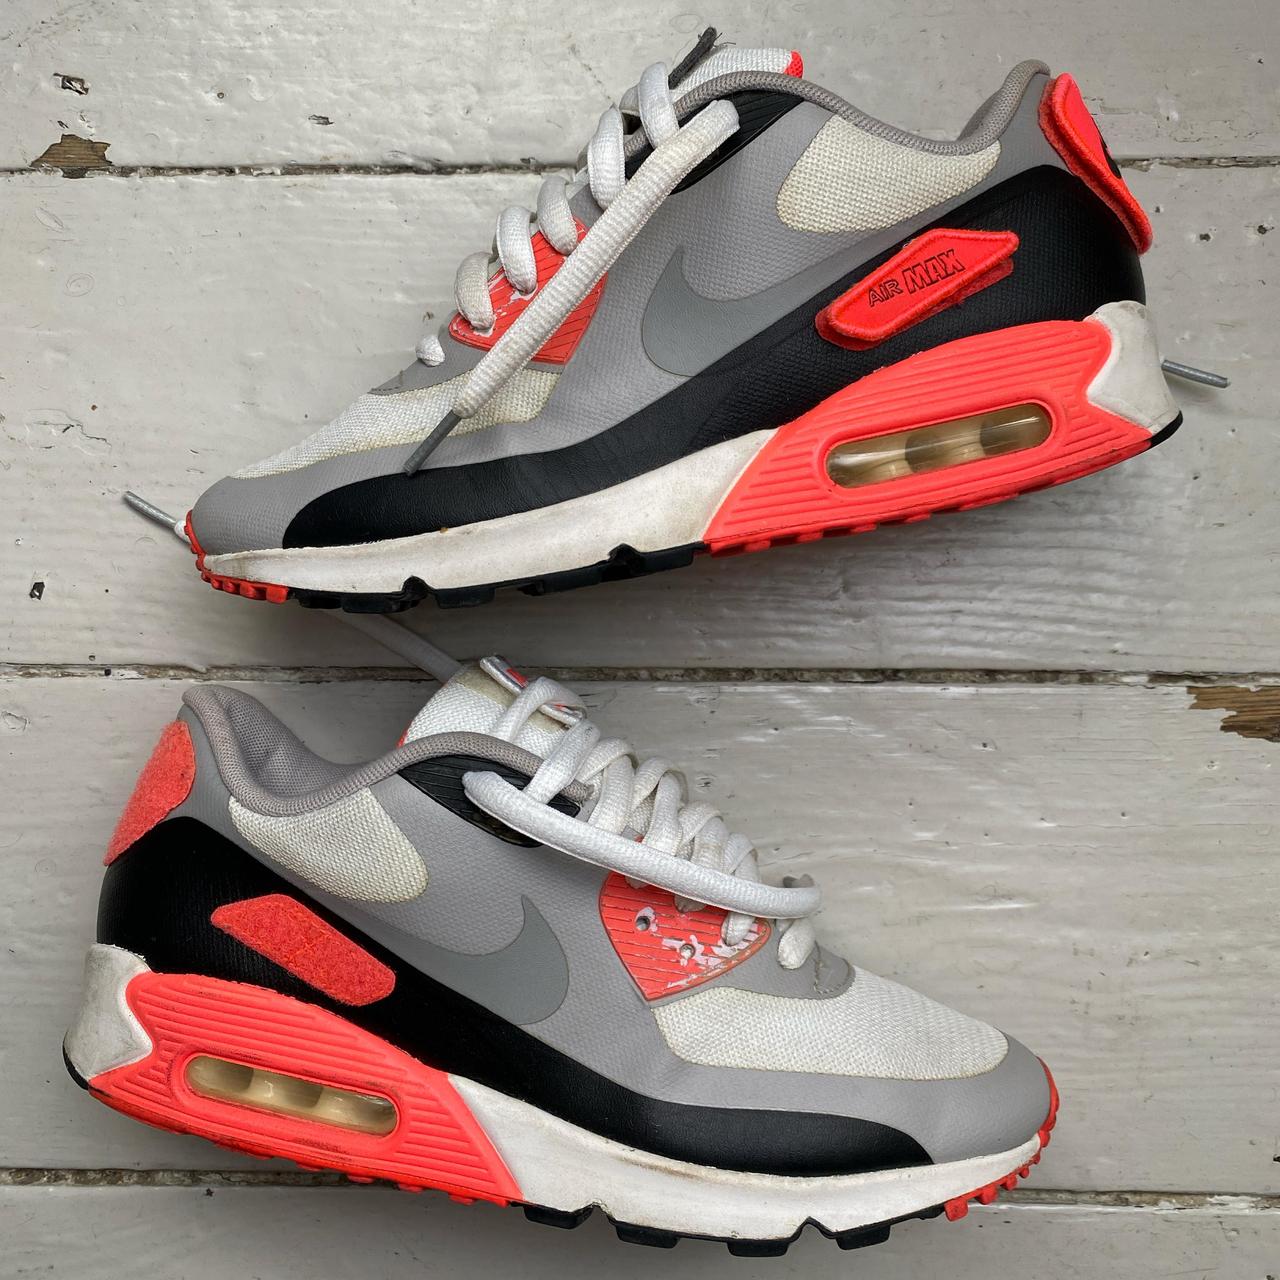 Nike Air Max 90 Infrared Velcro Stick on Patches